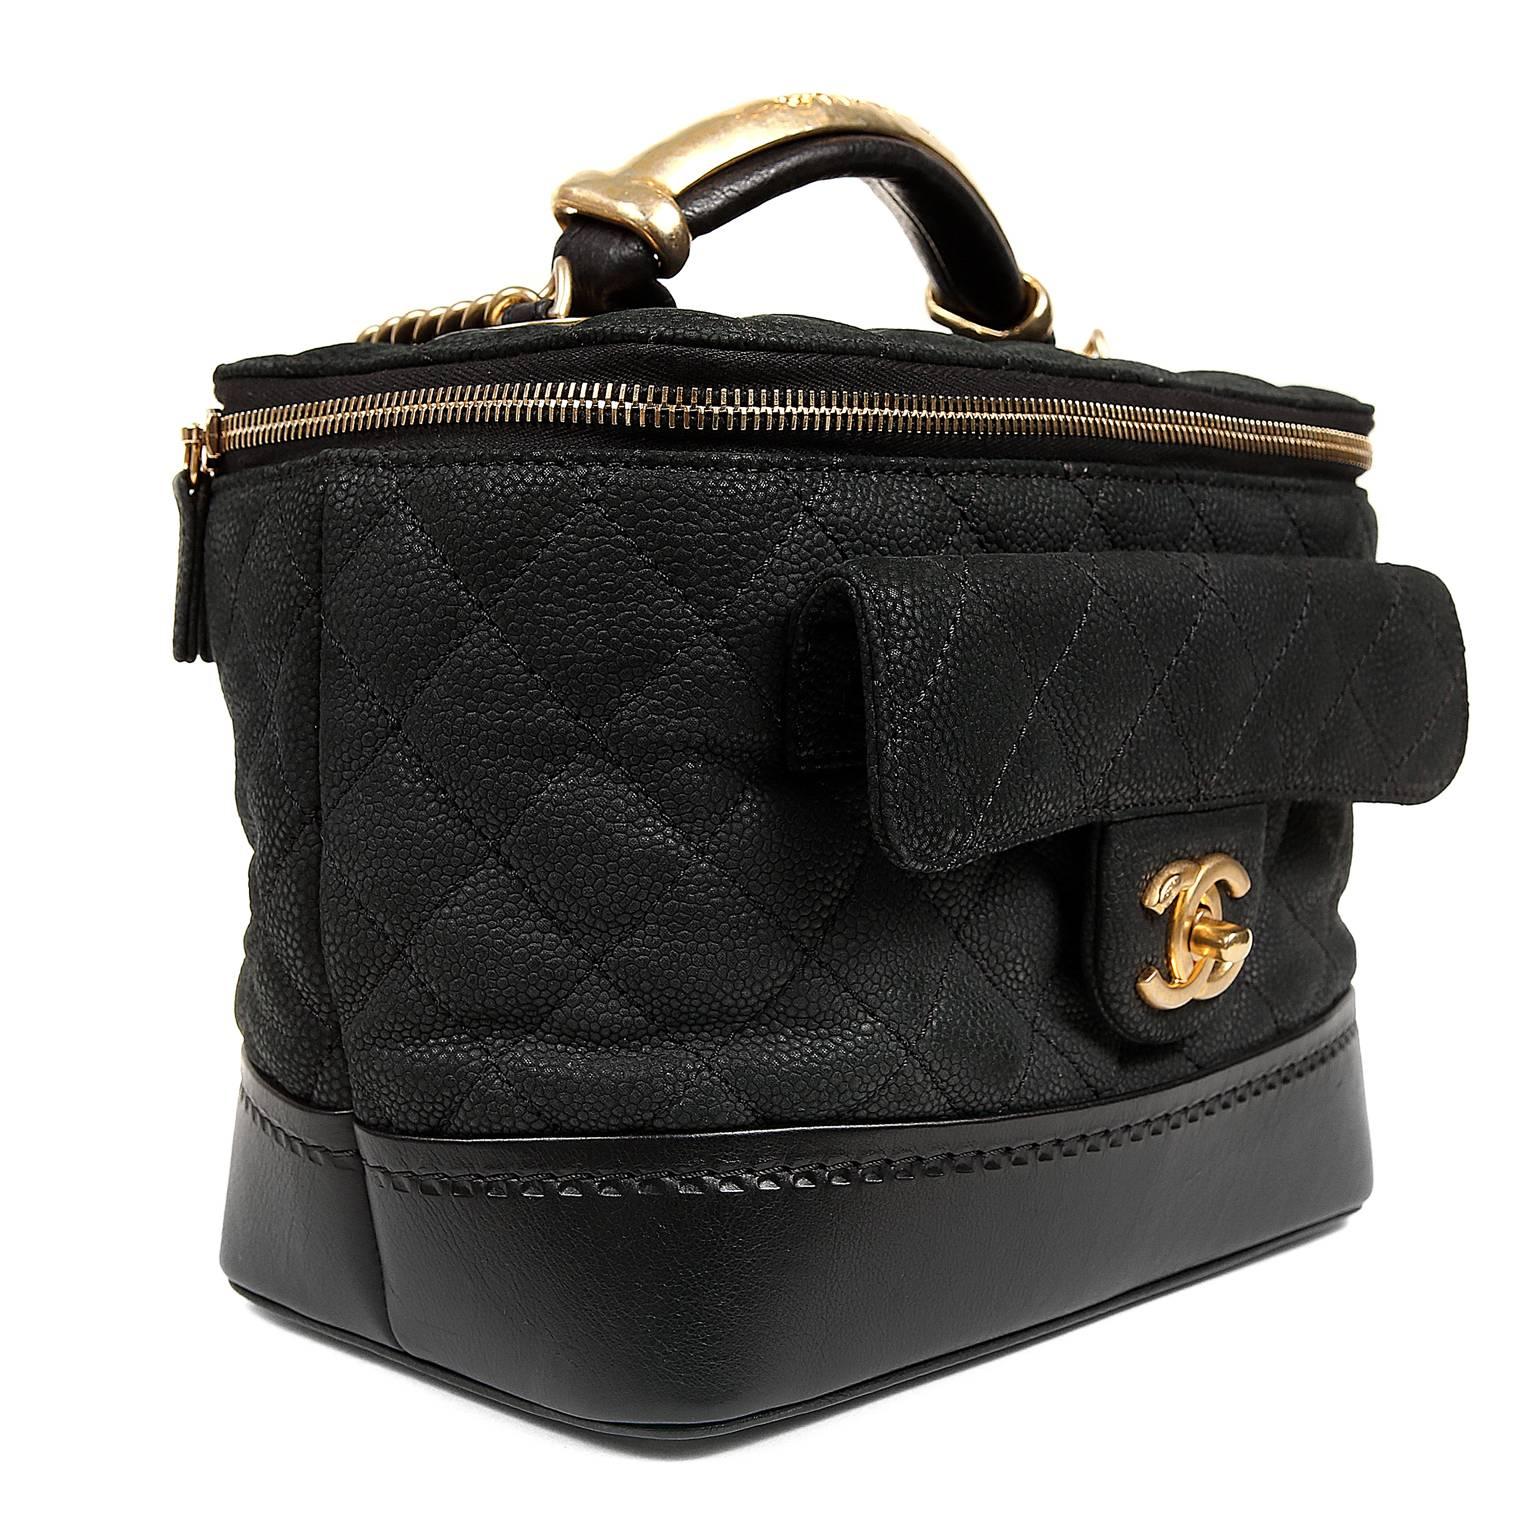 Chanel Black Leather Globetrotter Bag In New Condition For Sale In Malibu, CA